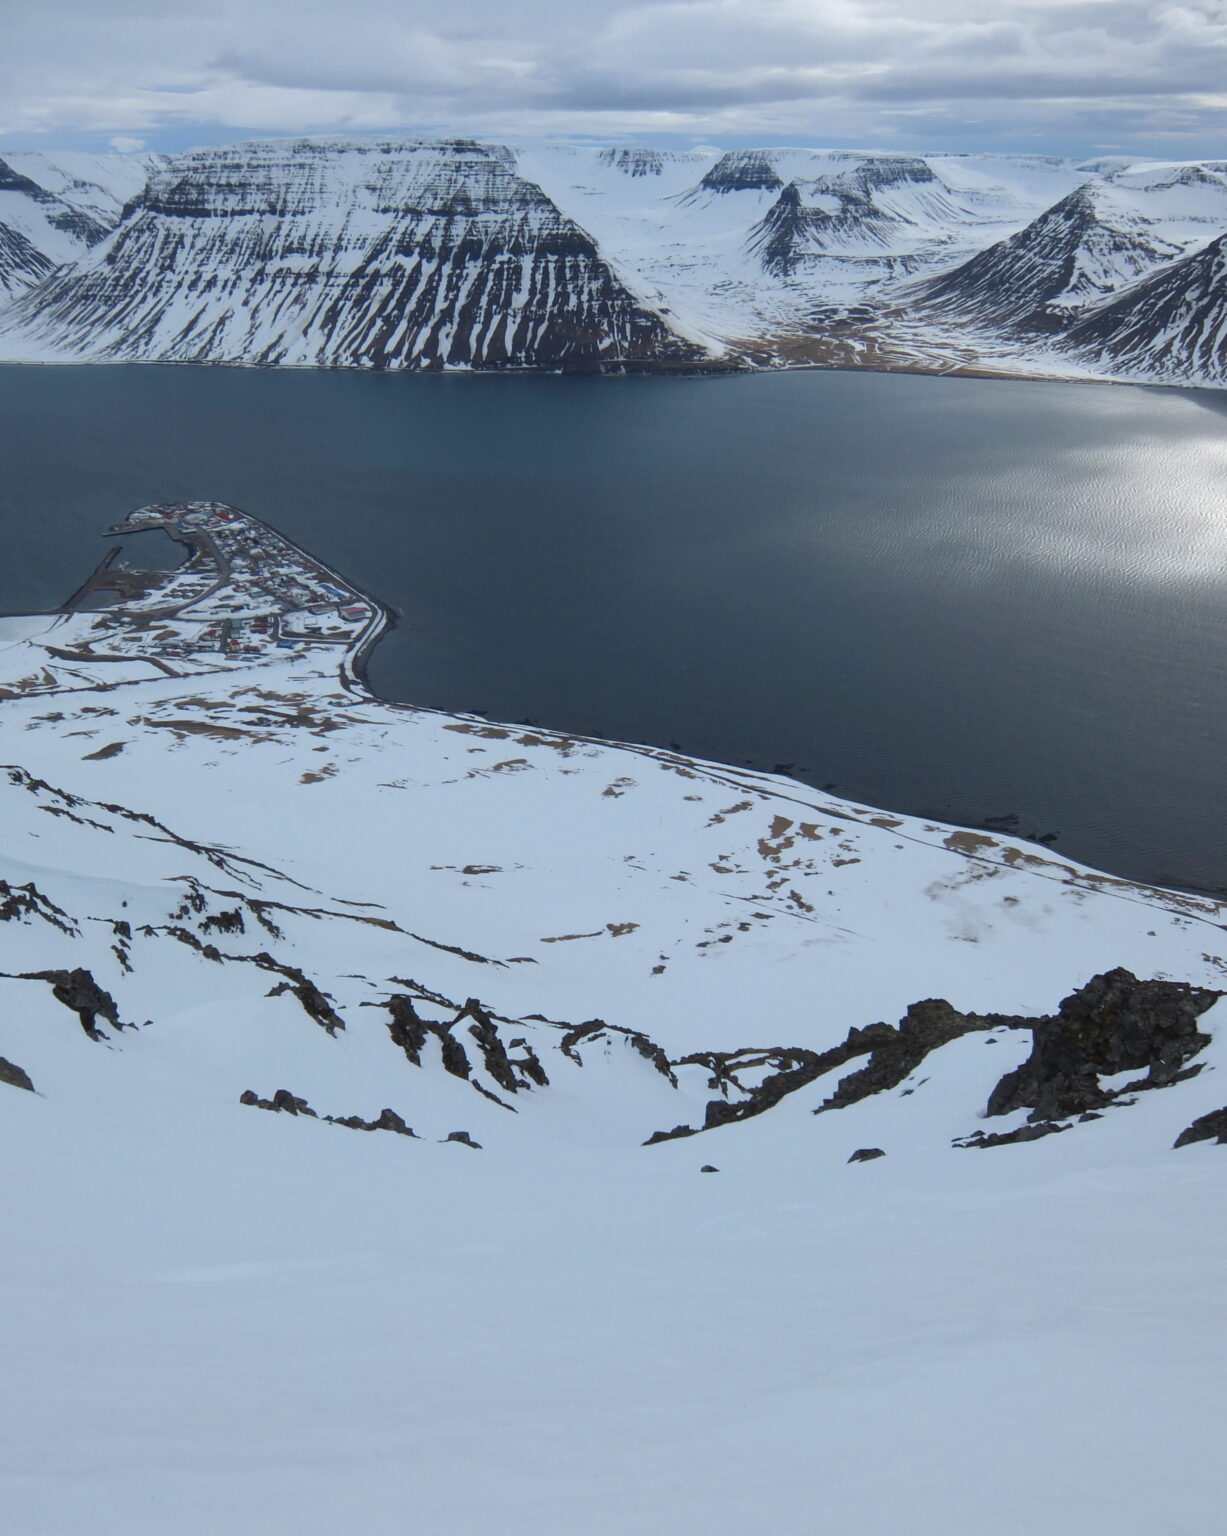 Looking down the South Couloir of Eyrarfjall with Flateyri in the distance